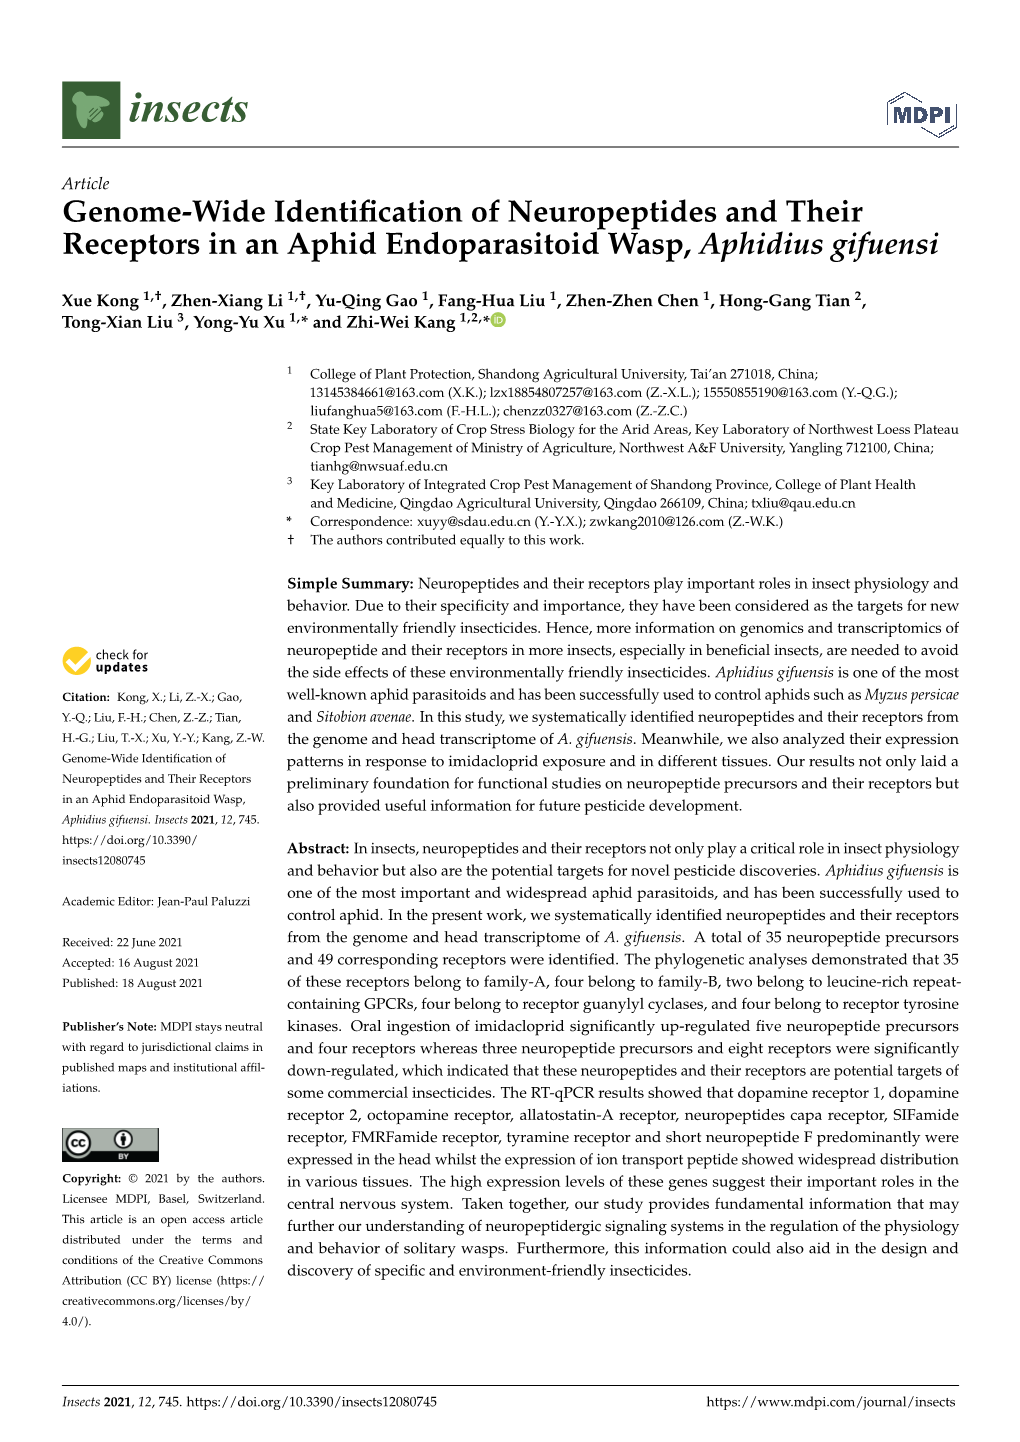 Genome-Wide Identification of Neuropeptides and Their Receptors in an Aphid Endoparasitoid Wasp, Aphidius Gifuensi